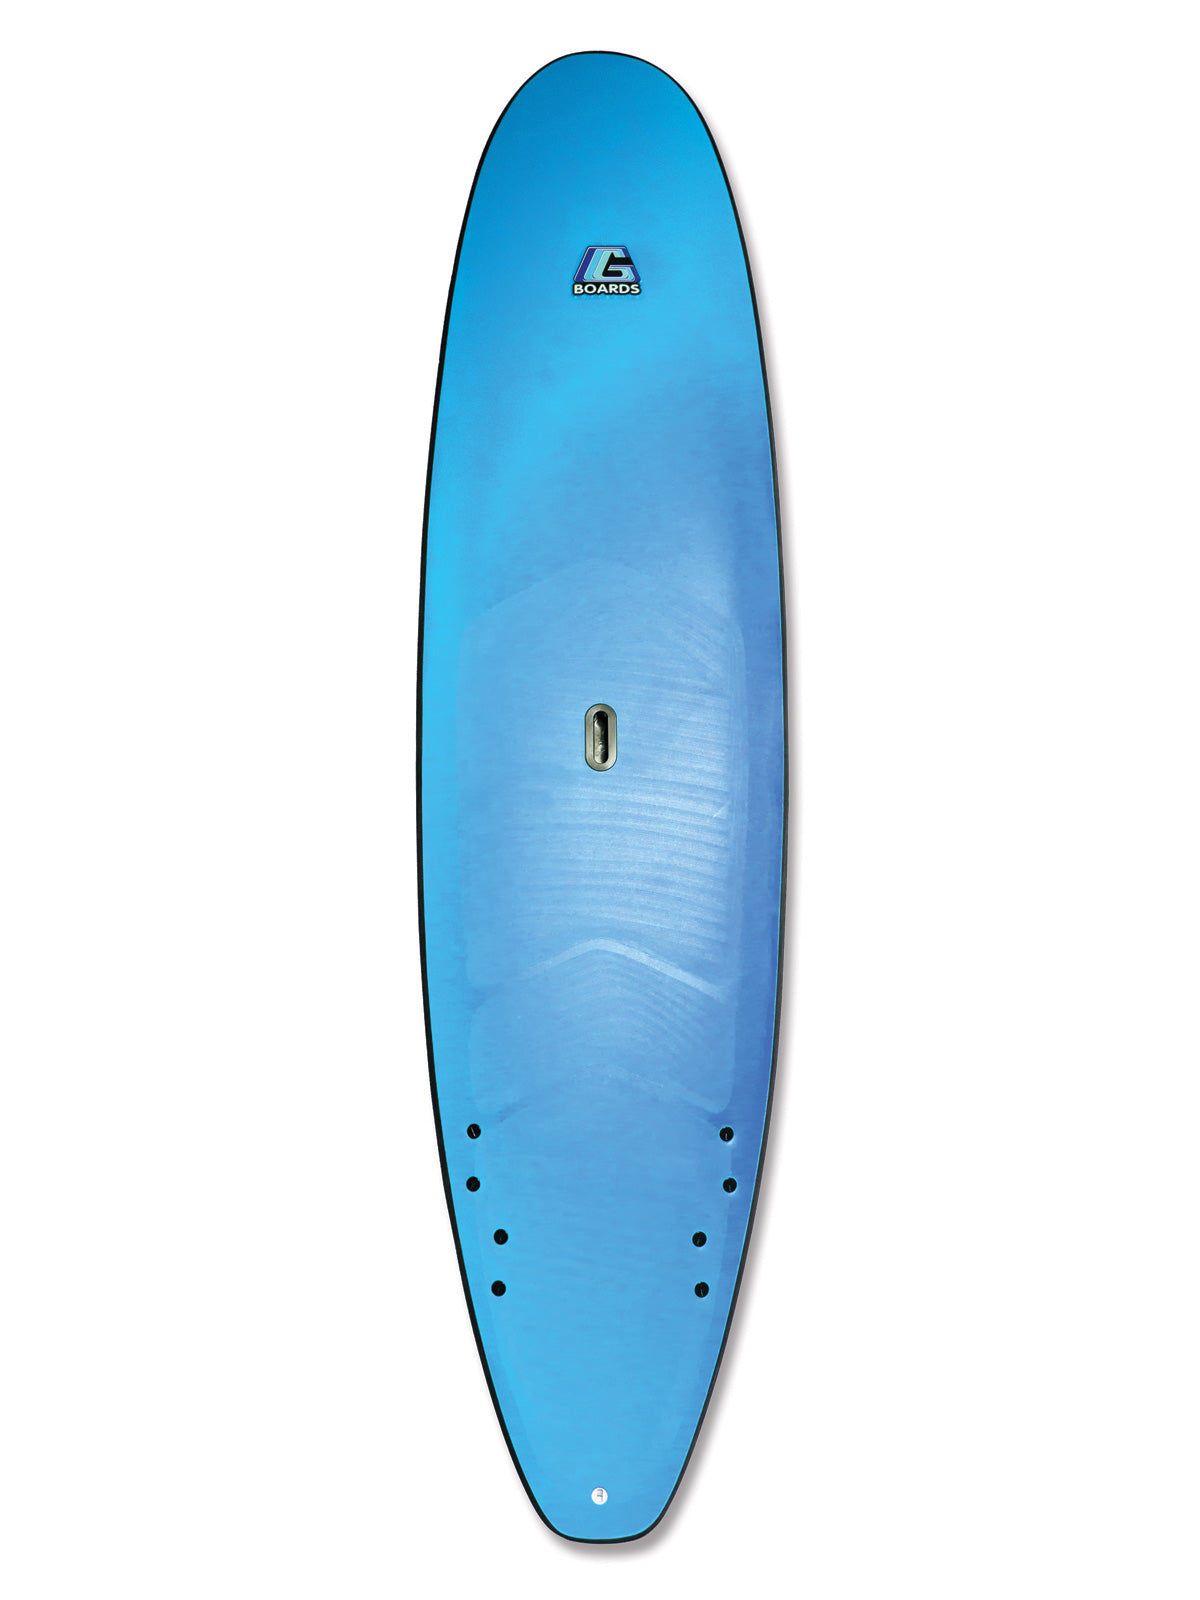 STAND UP PADDLEBOARD 10'6 x 32" x 4 3/4" (185 Litres)